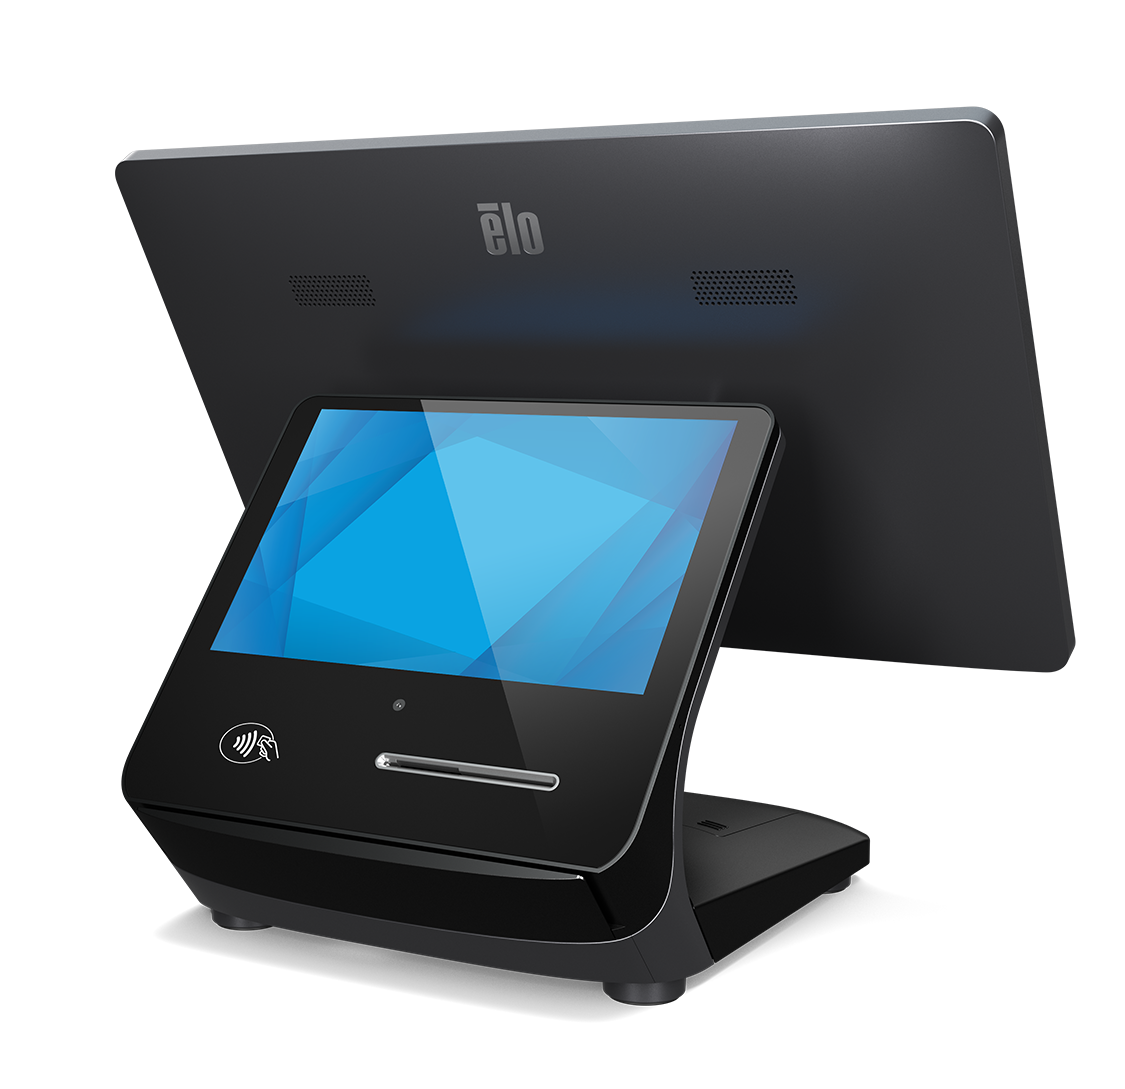 Elo Pay 7-inch integrated with Z70 Stand.